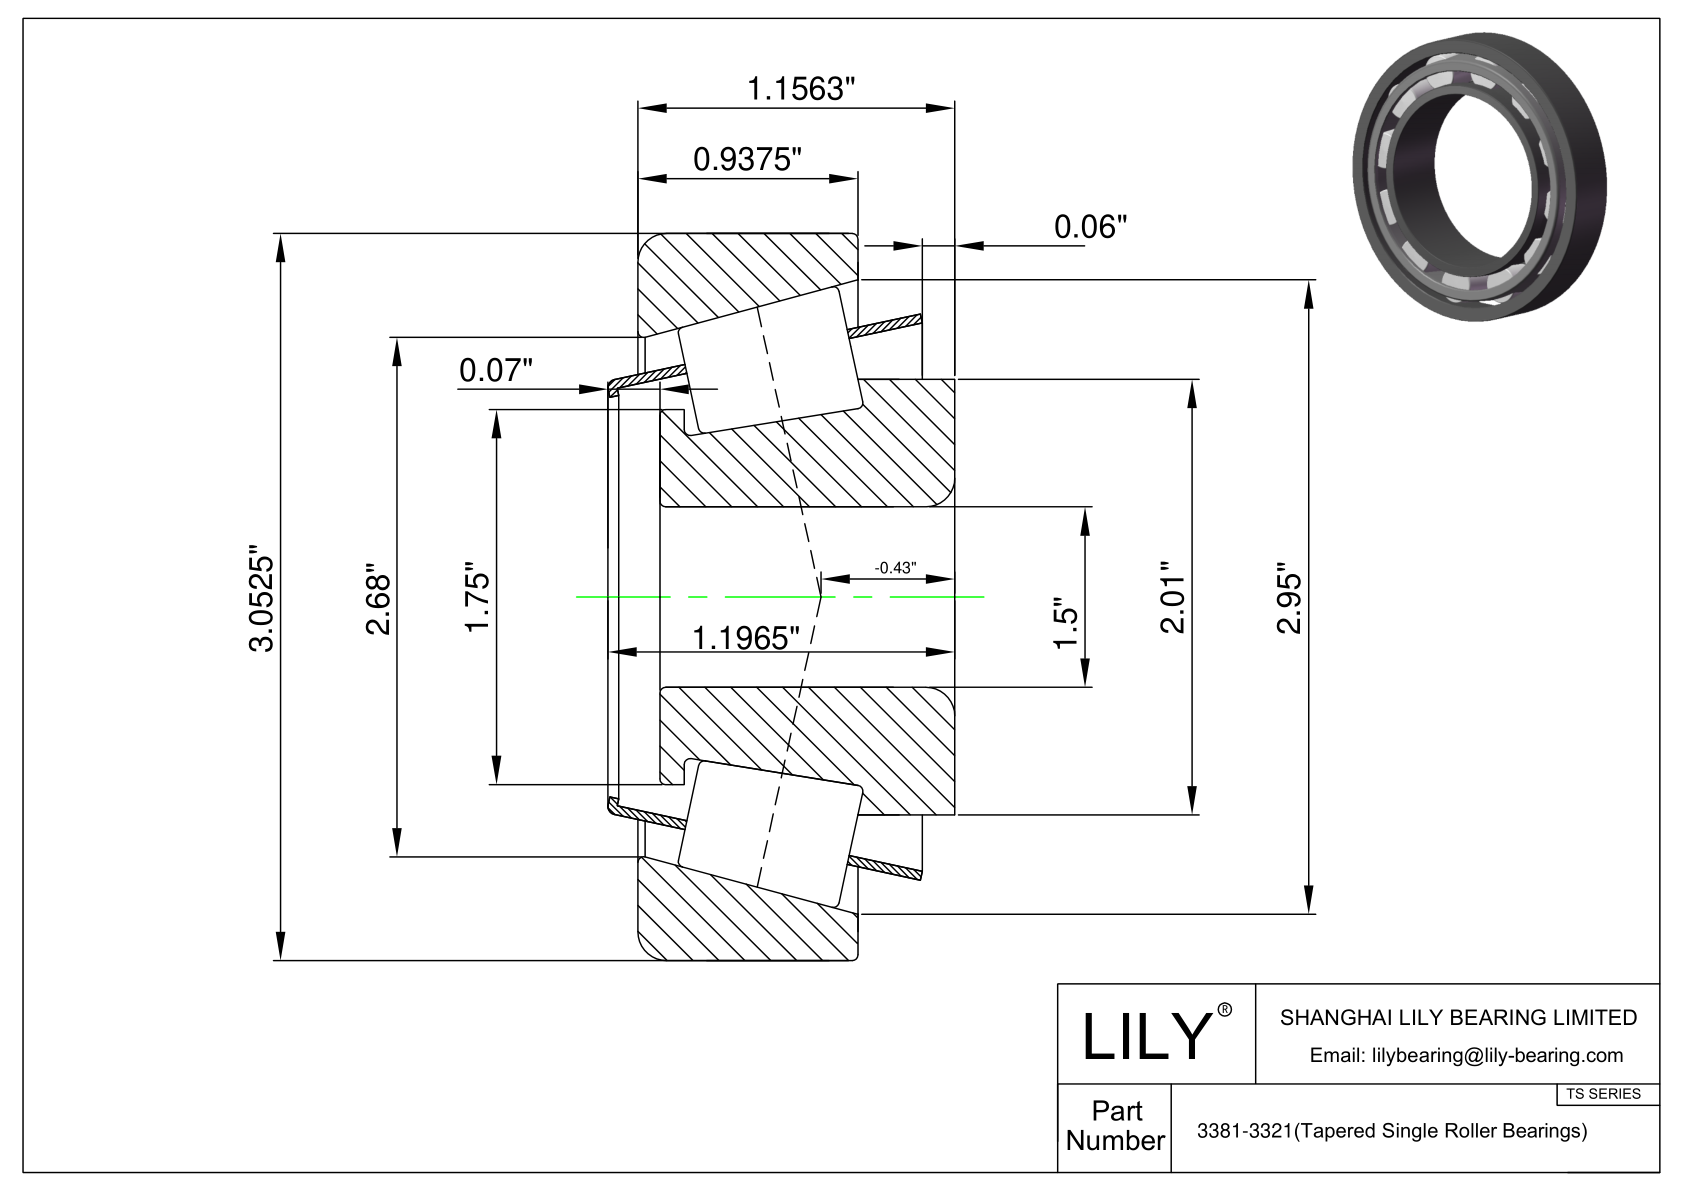 3381-3321 TS (Tapered Single Roller Bearings) (Imperial) cad drawing